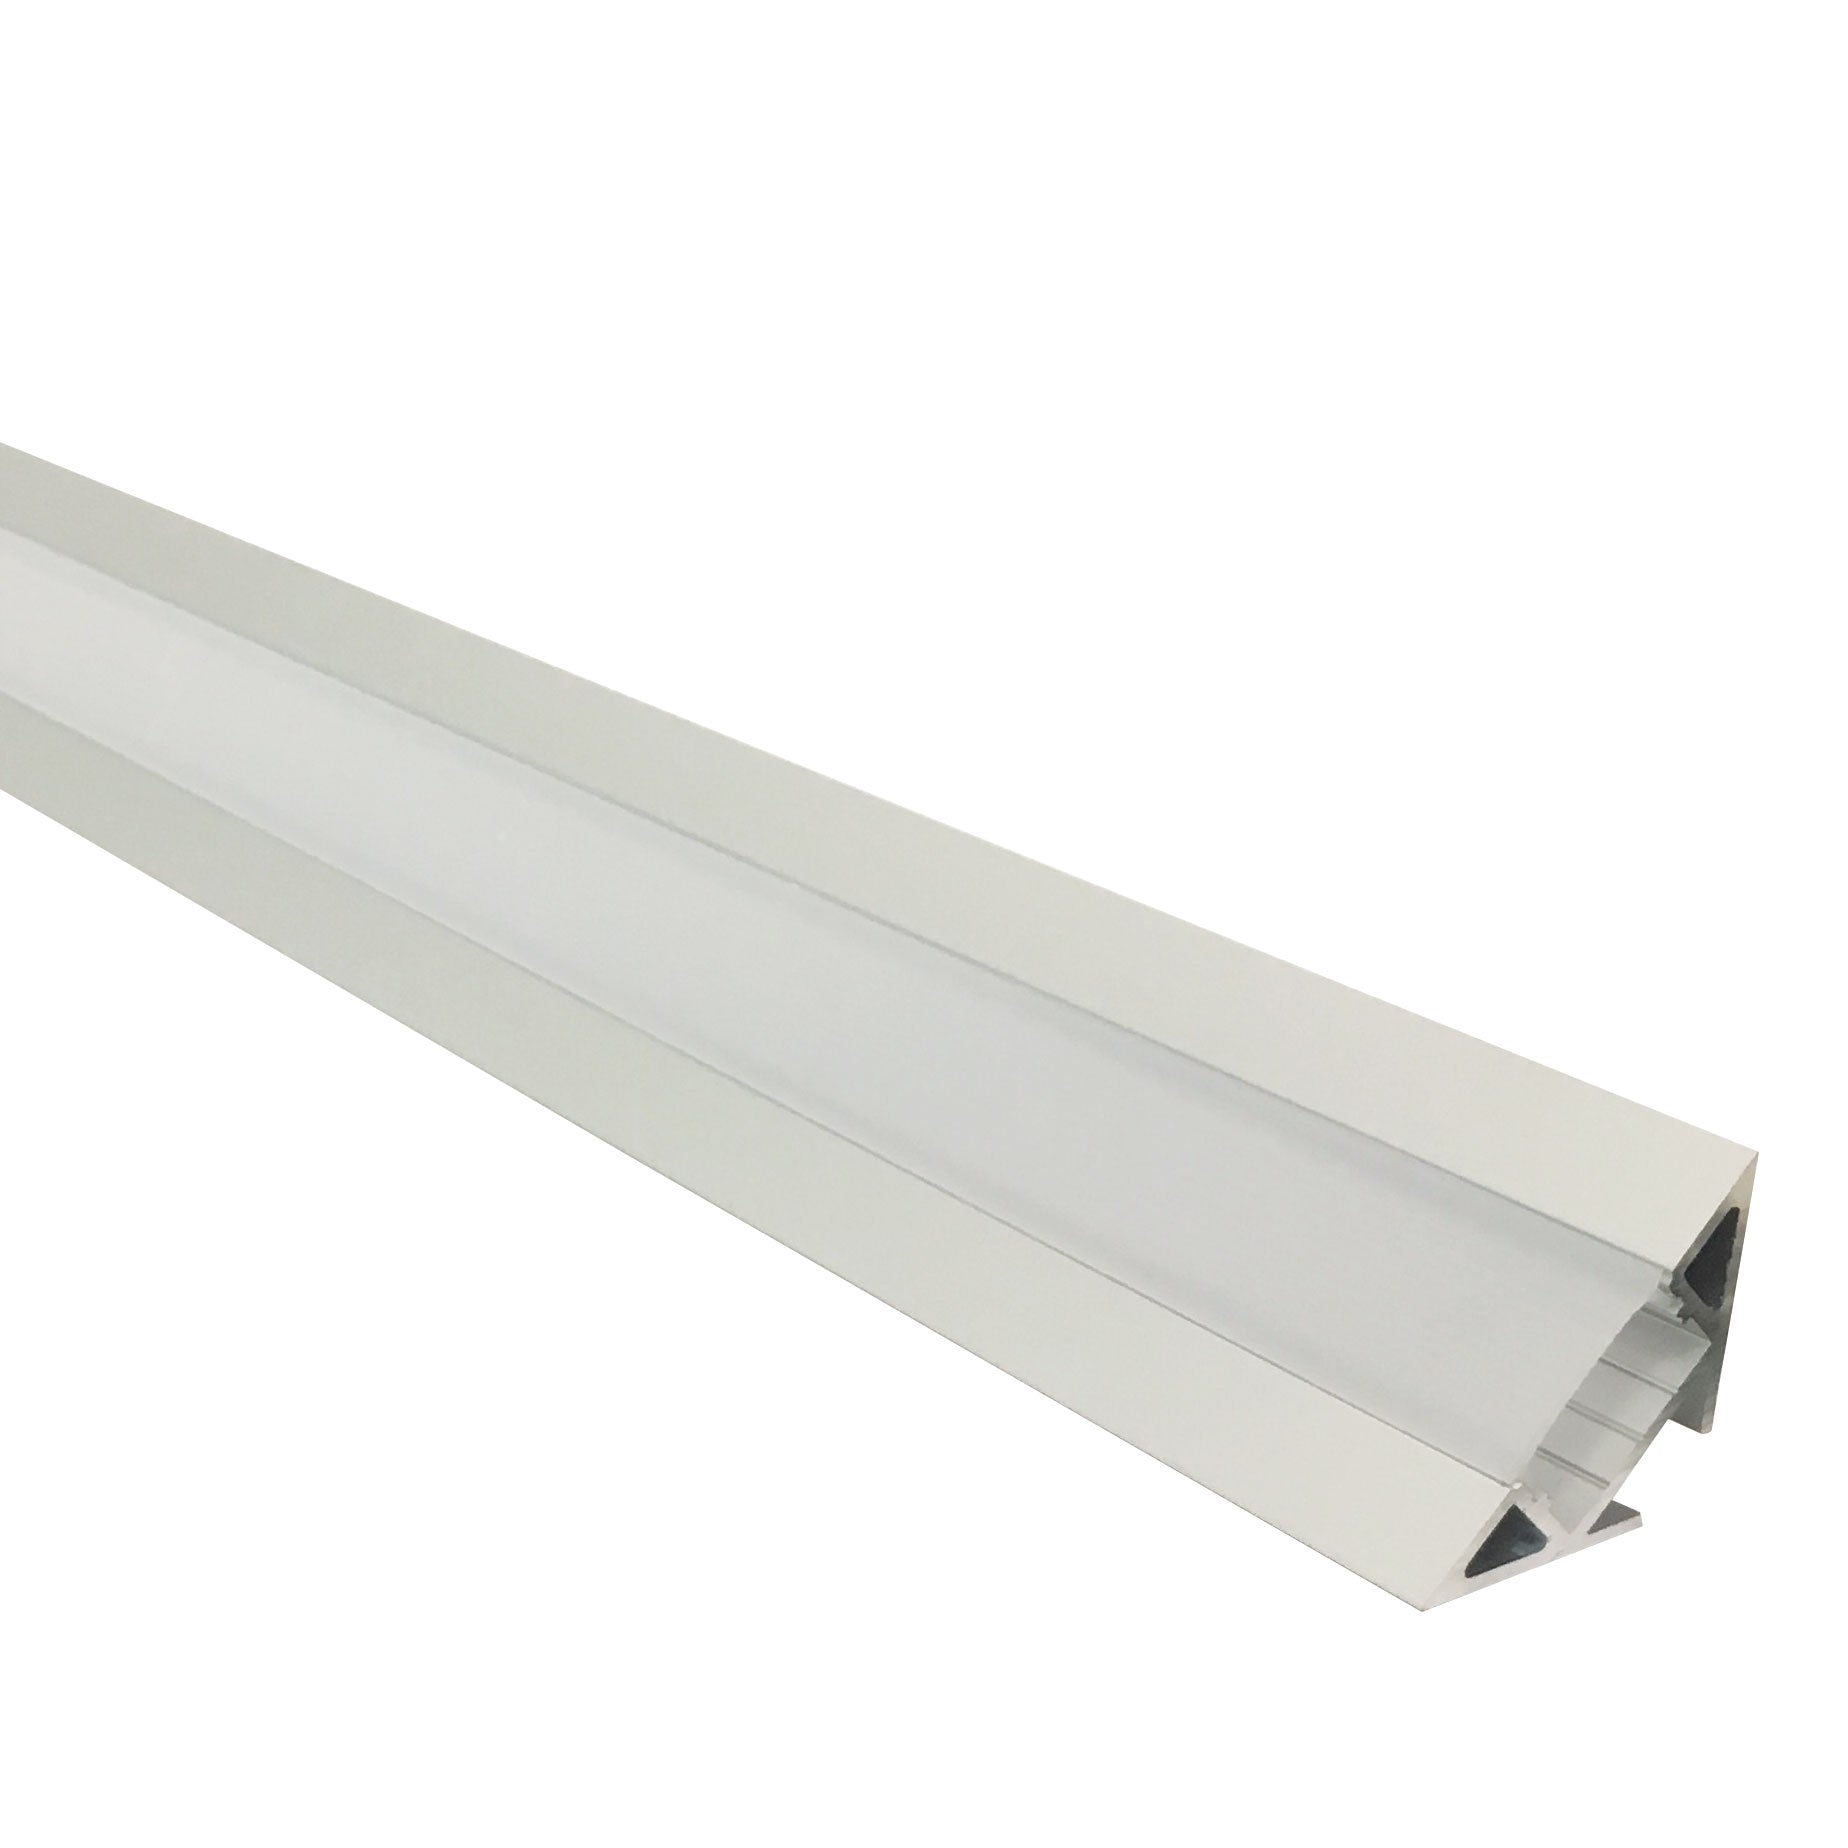 Nora Lighting NATL-C28A - Accent / Undercabinet - 4-ft Corner Channel, Aluminum (Plastic Diffuser and End Caps Included)